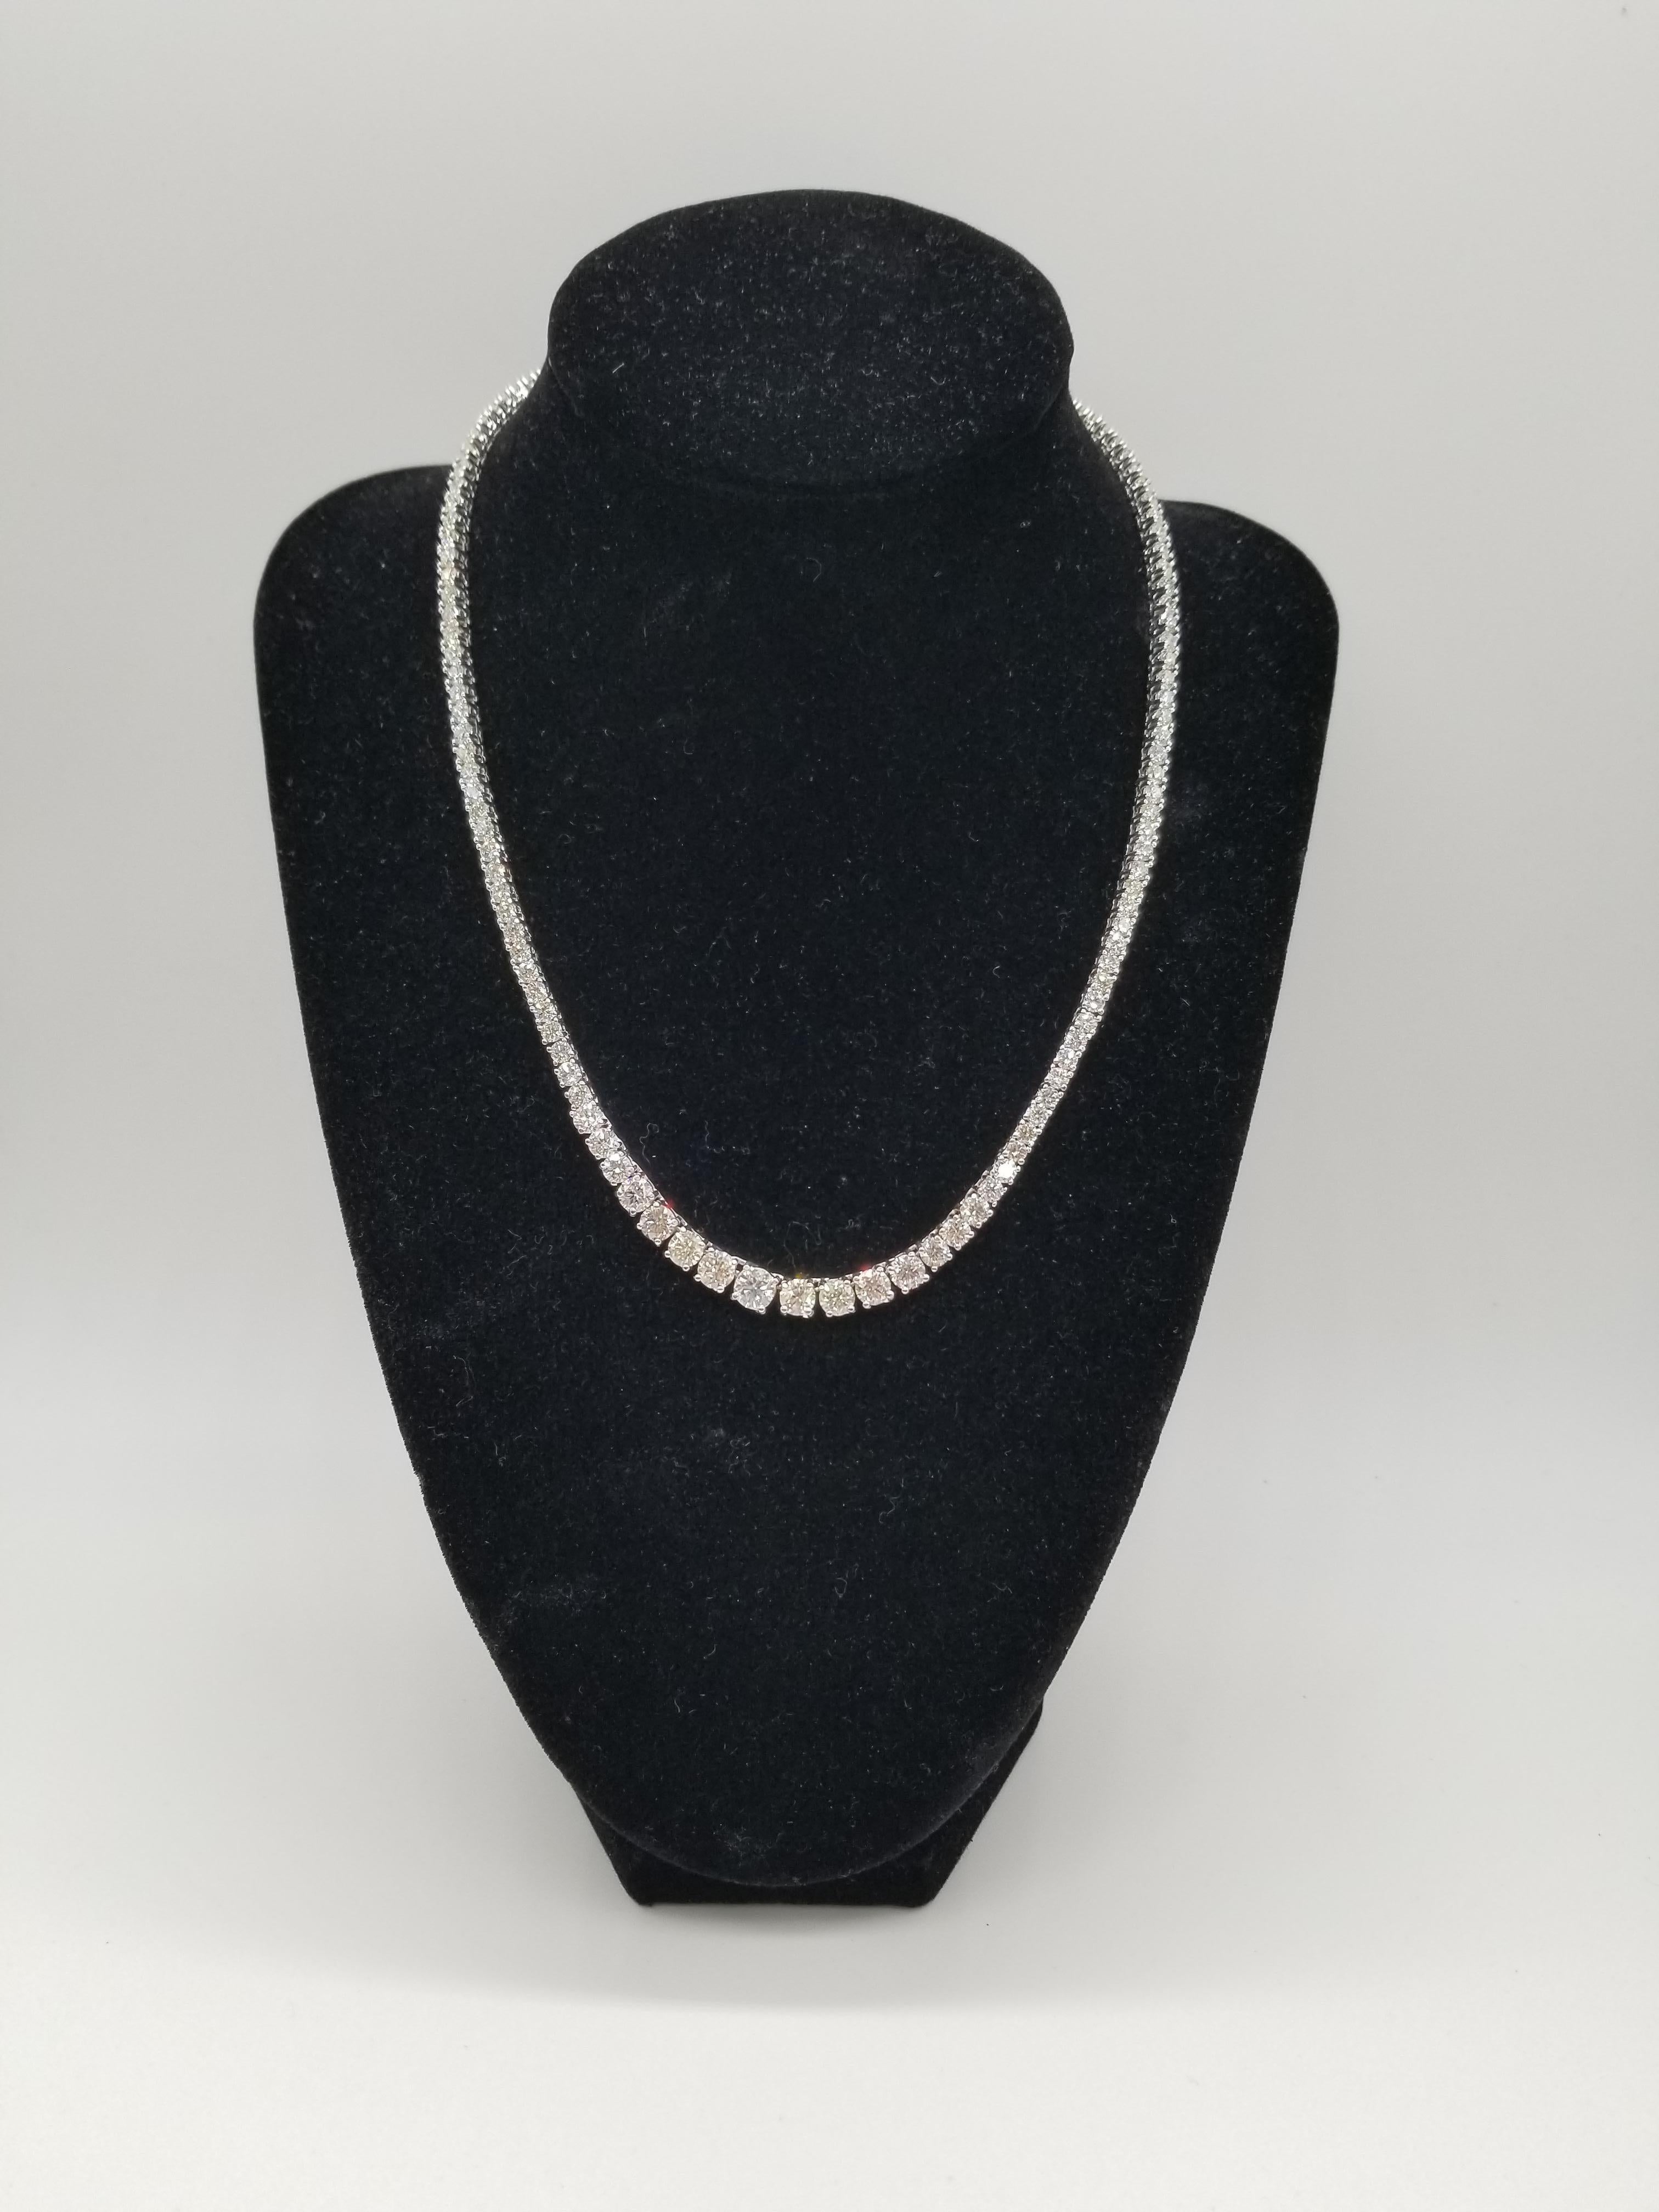 Stunning 14 Karat White Gold Round Brilliant Cut Diamond Riviera Graduated Tennis Necklace set on 4 prong setting. The total diamond weight is 18.03 carats. 131 pcs natural diamond size from 0.70 pts to 10 pts. The closure is an insert clasp with